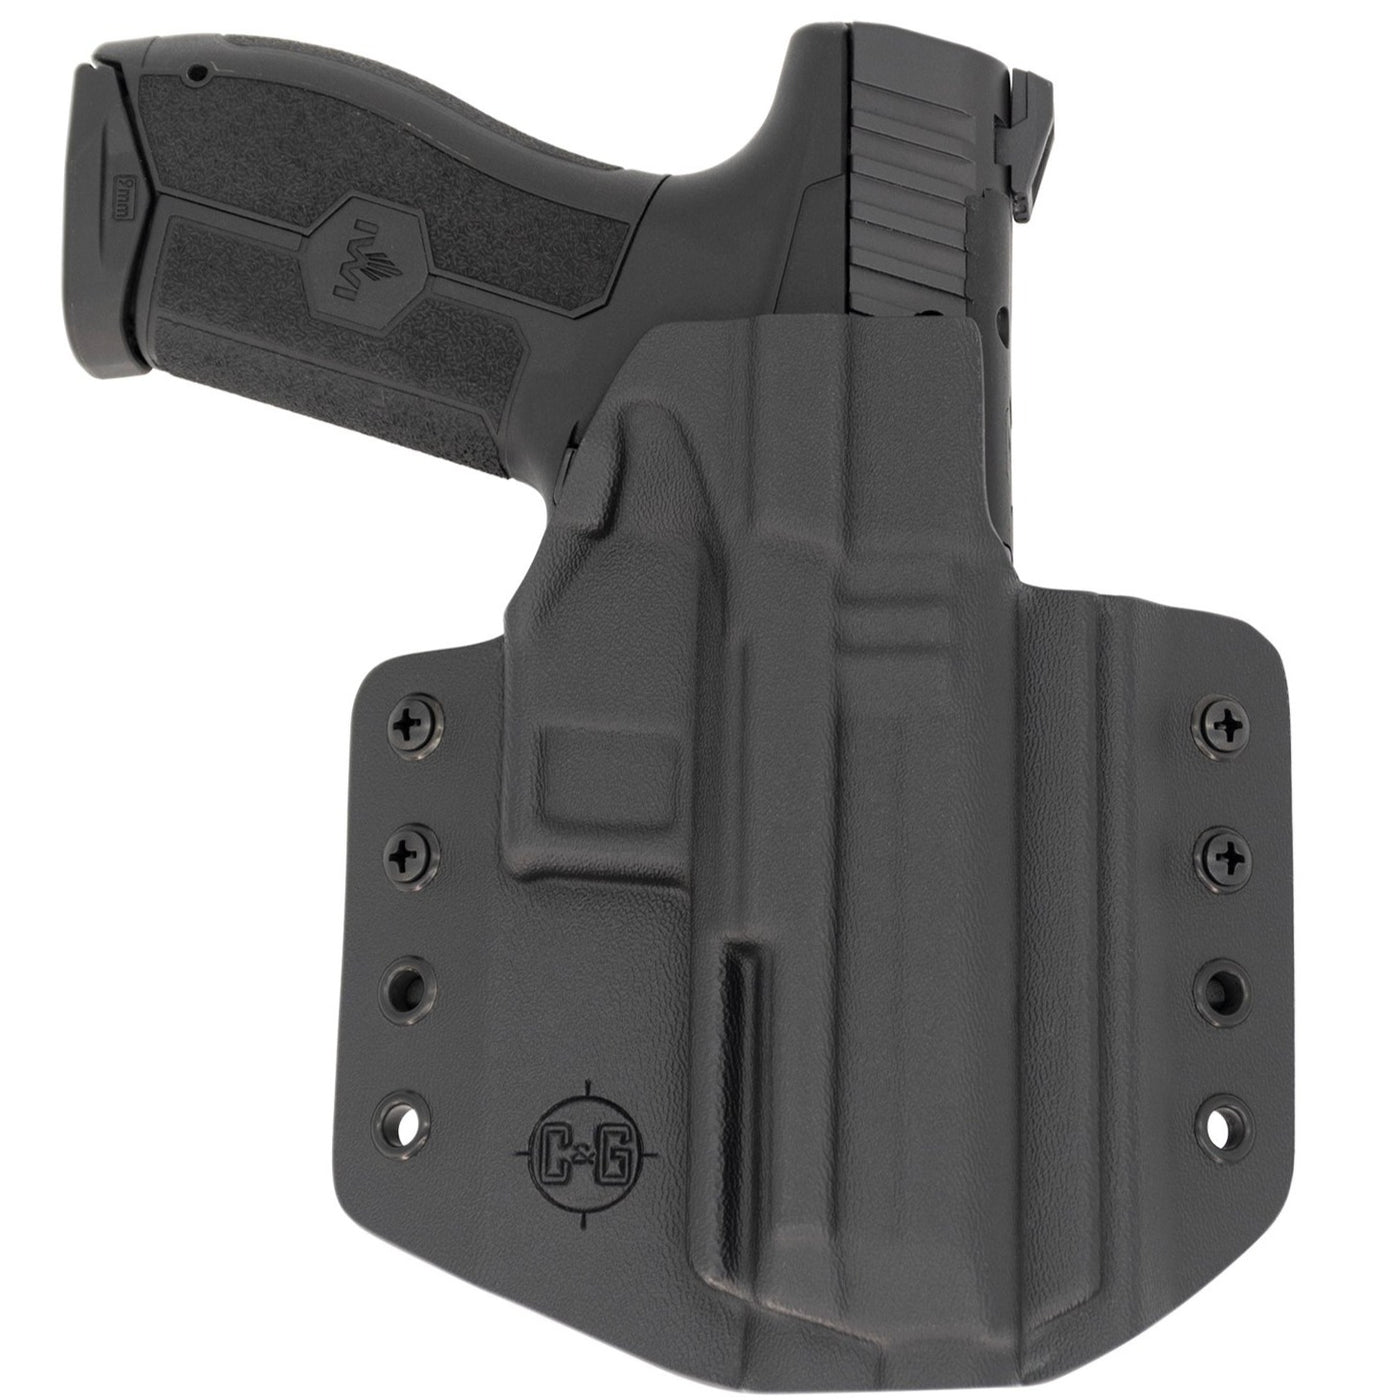 This is a C&G Holsters Covert Series Outside the waistband holster for an IWI Masada 9mm firearm showing the front with the pistol. 